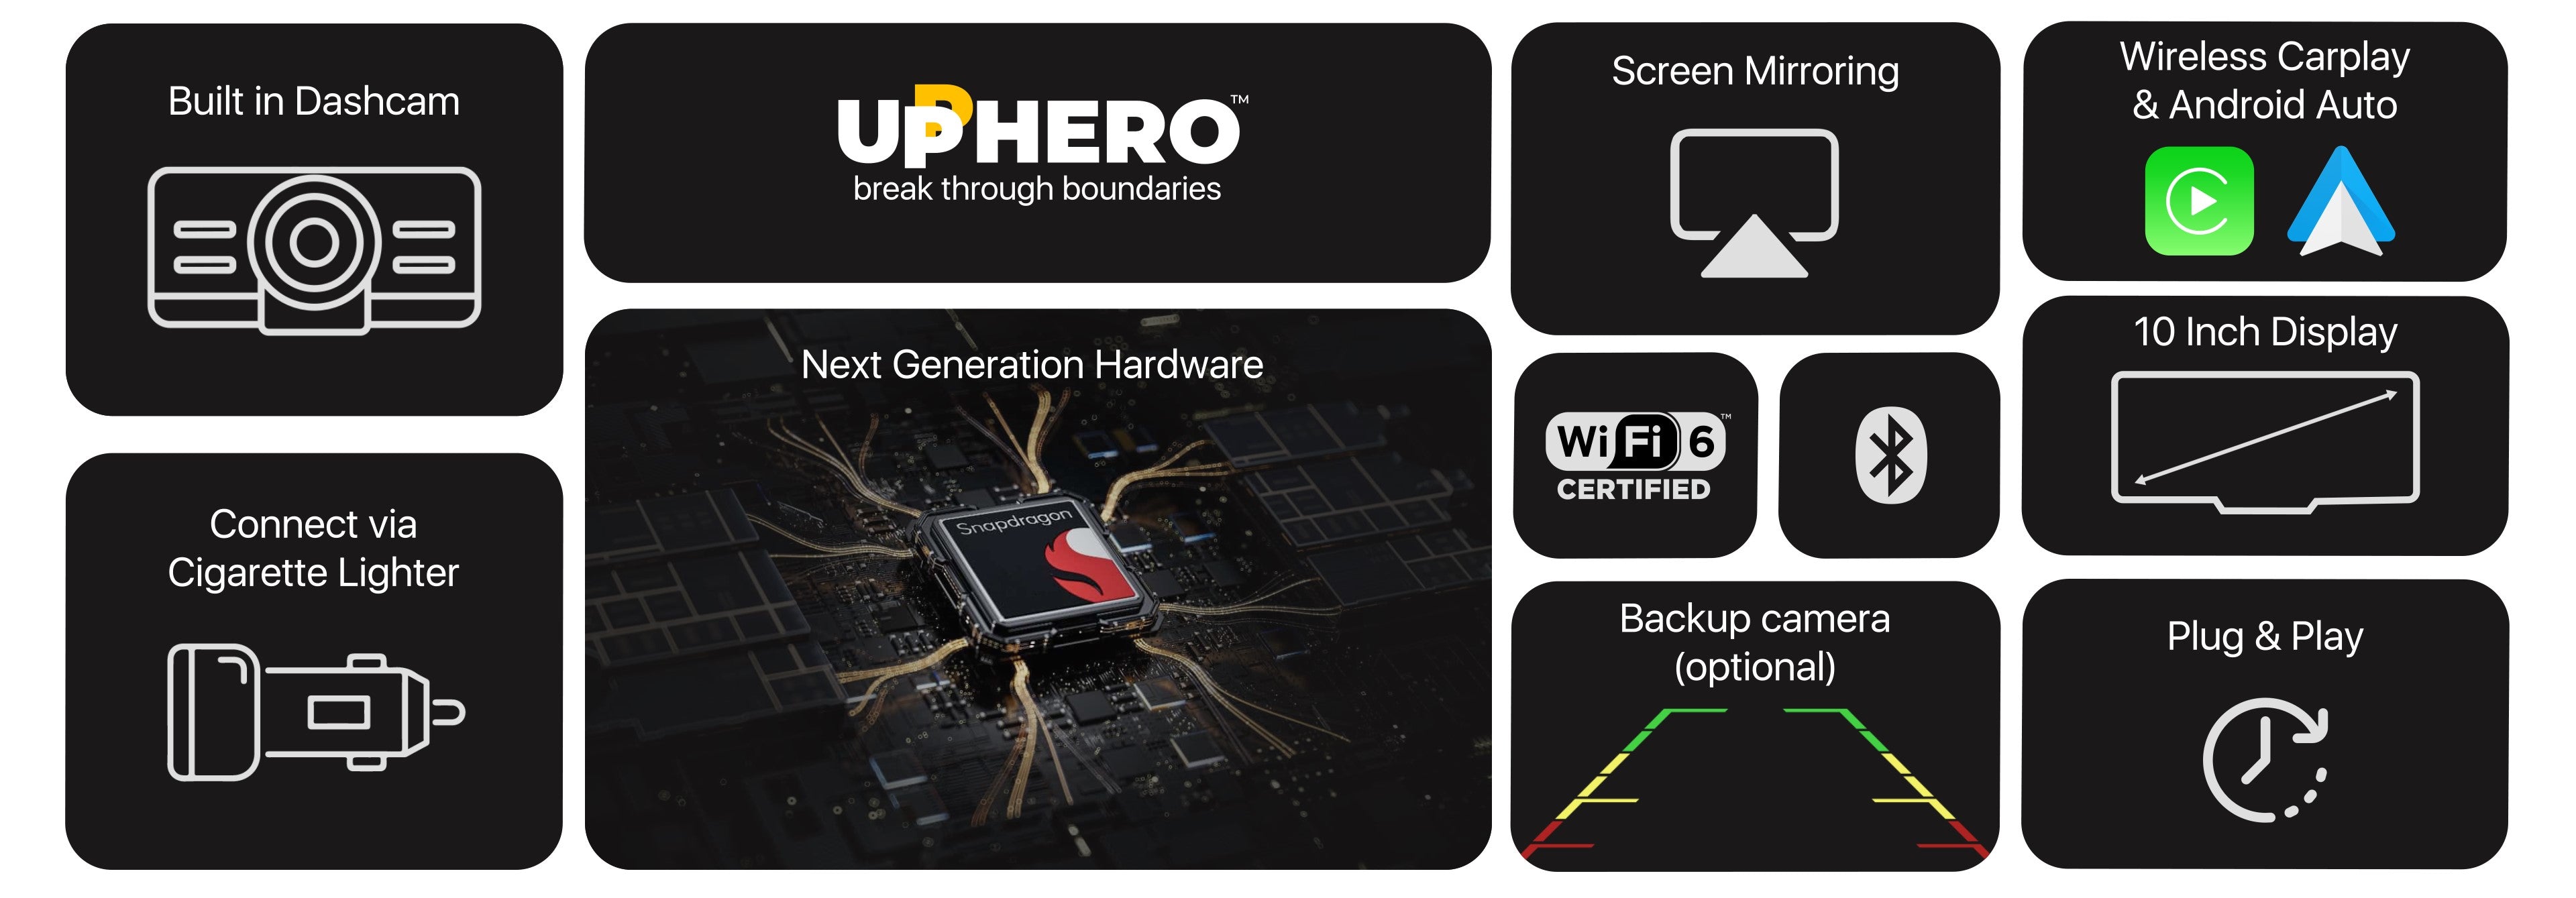 Infographic showing features of the Uphero dash cam, including built-in dashboard, screen mirroring, wireless CarPlay and Android Auto, 360 degree camera view, motion detection, backup camera, plug and play setup, and WiFi connectivity.